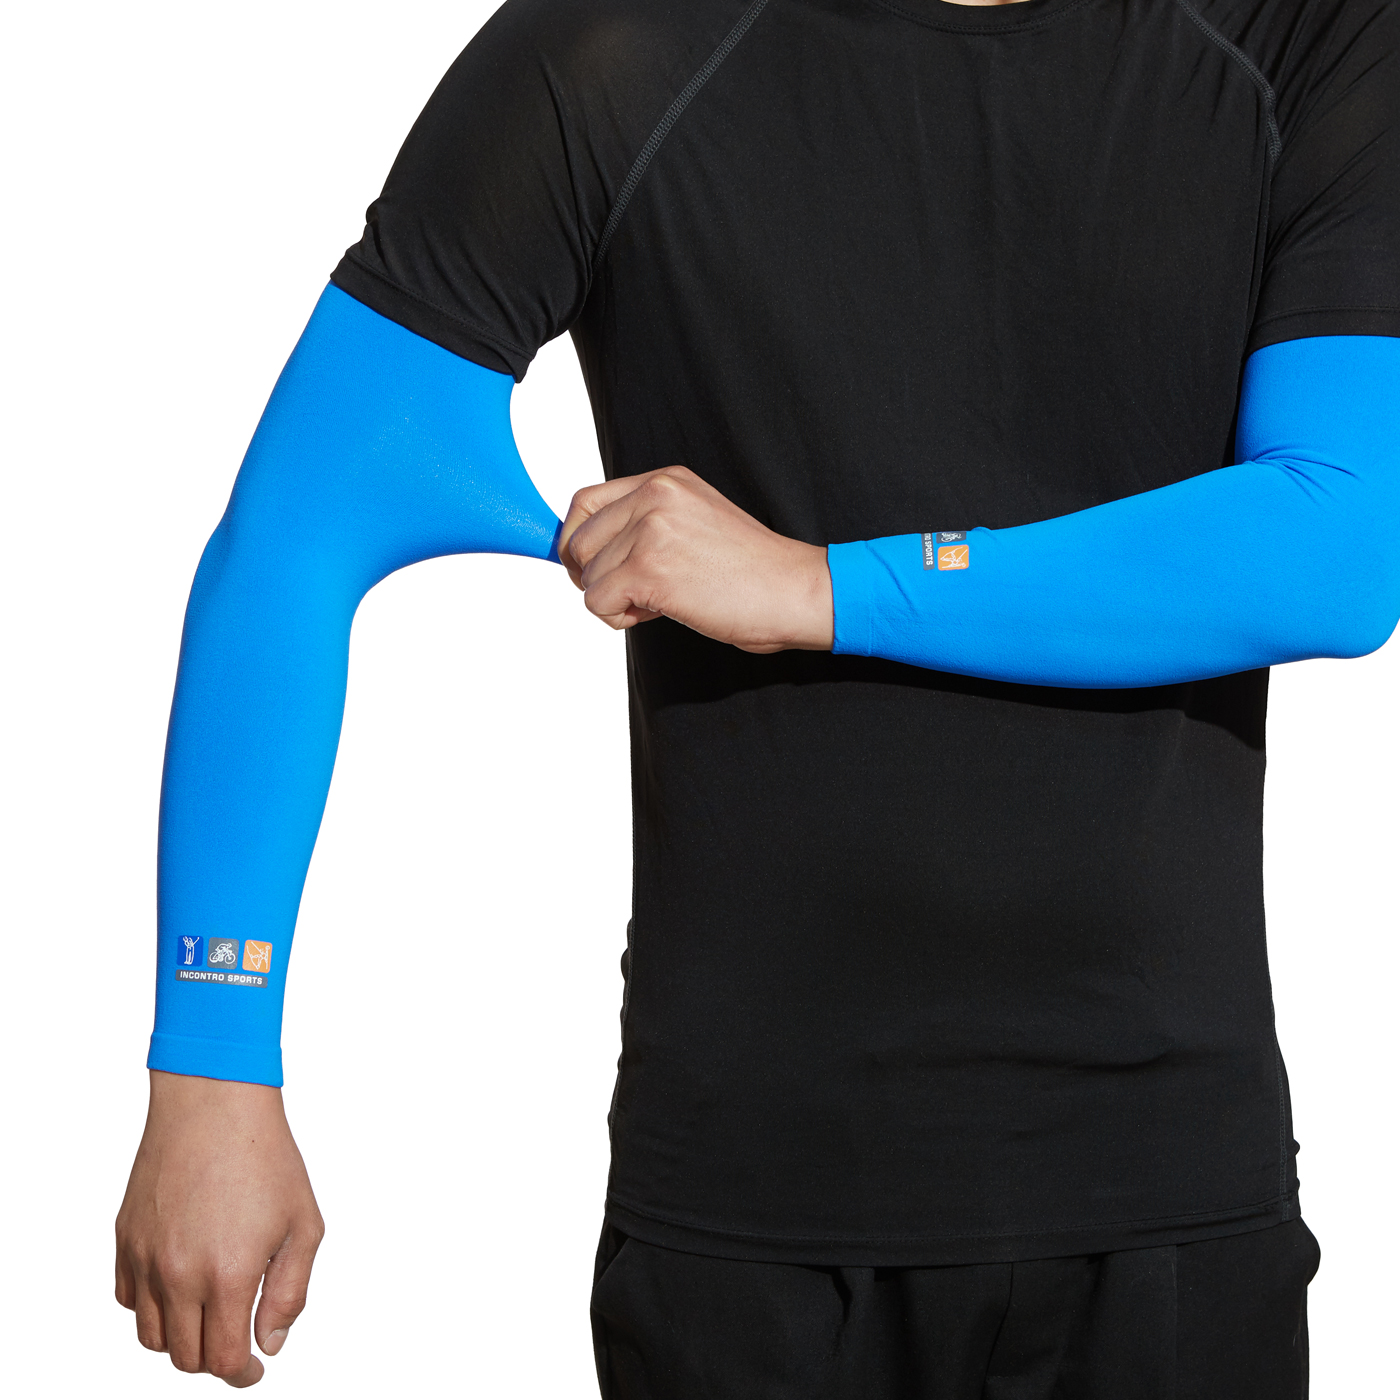 buyKOREA for Buyers-Incontro Arm Sleeves UV Protection Outd